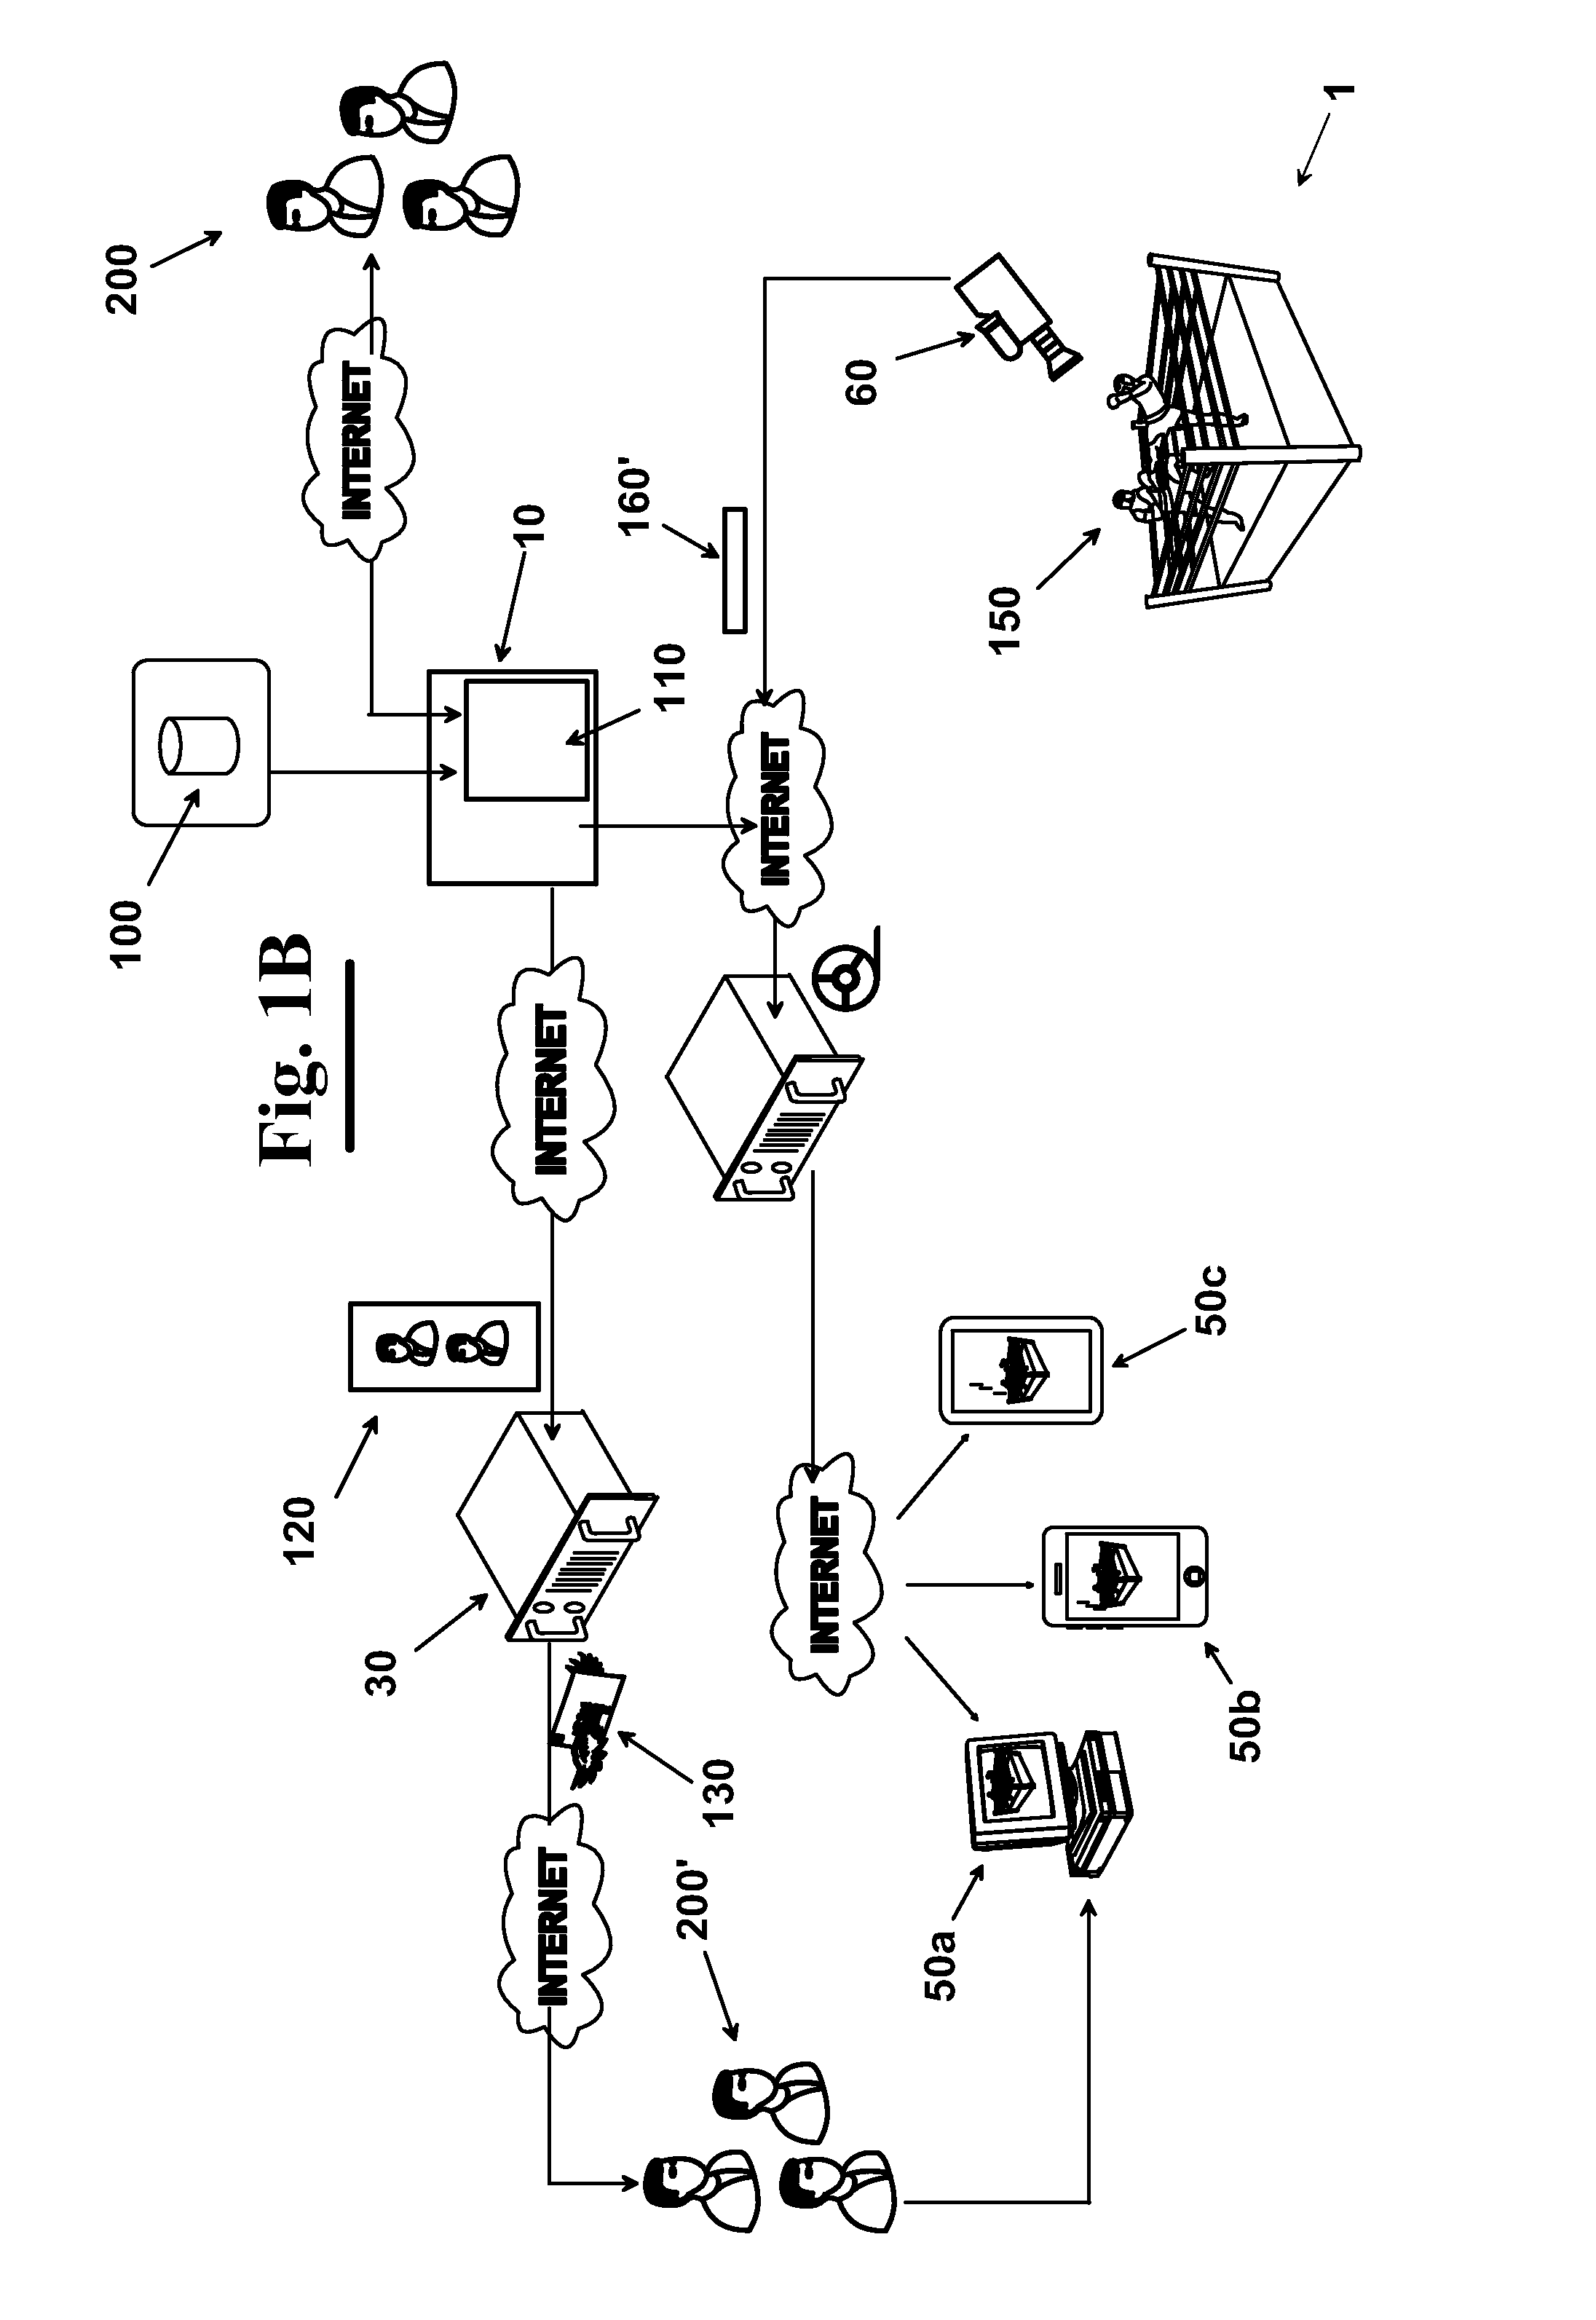 Method for managing via web data related to an event and/or a person and/or an organization